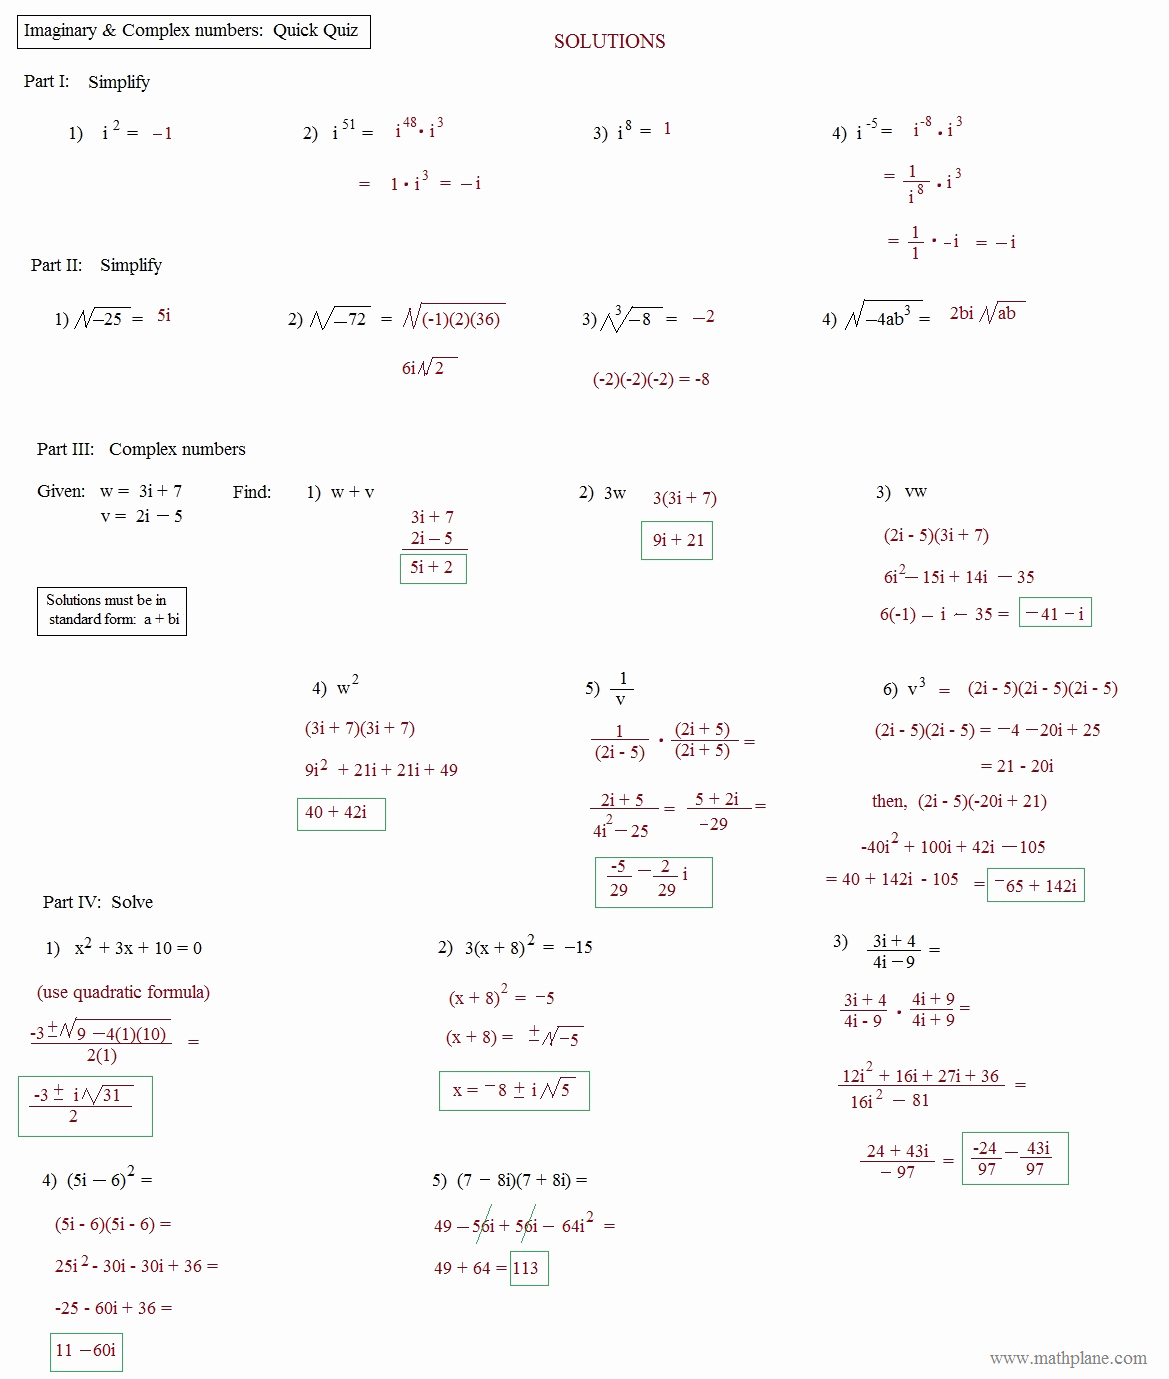 Complex Numbers Worksheet Answers Fresh Math Plane Imaginary and Plex Numbers